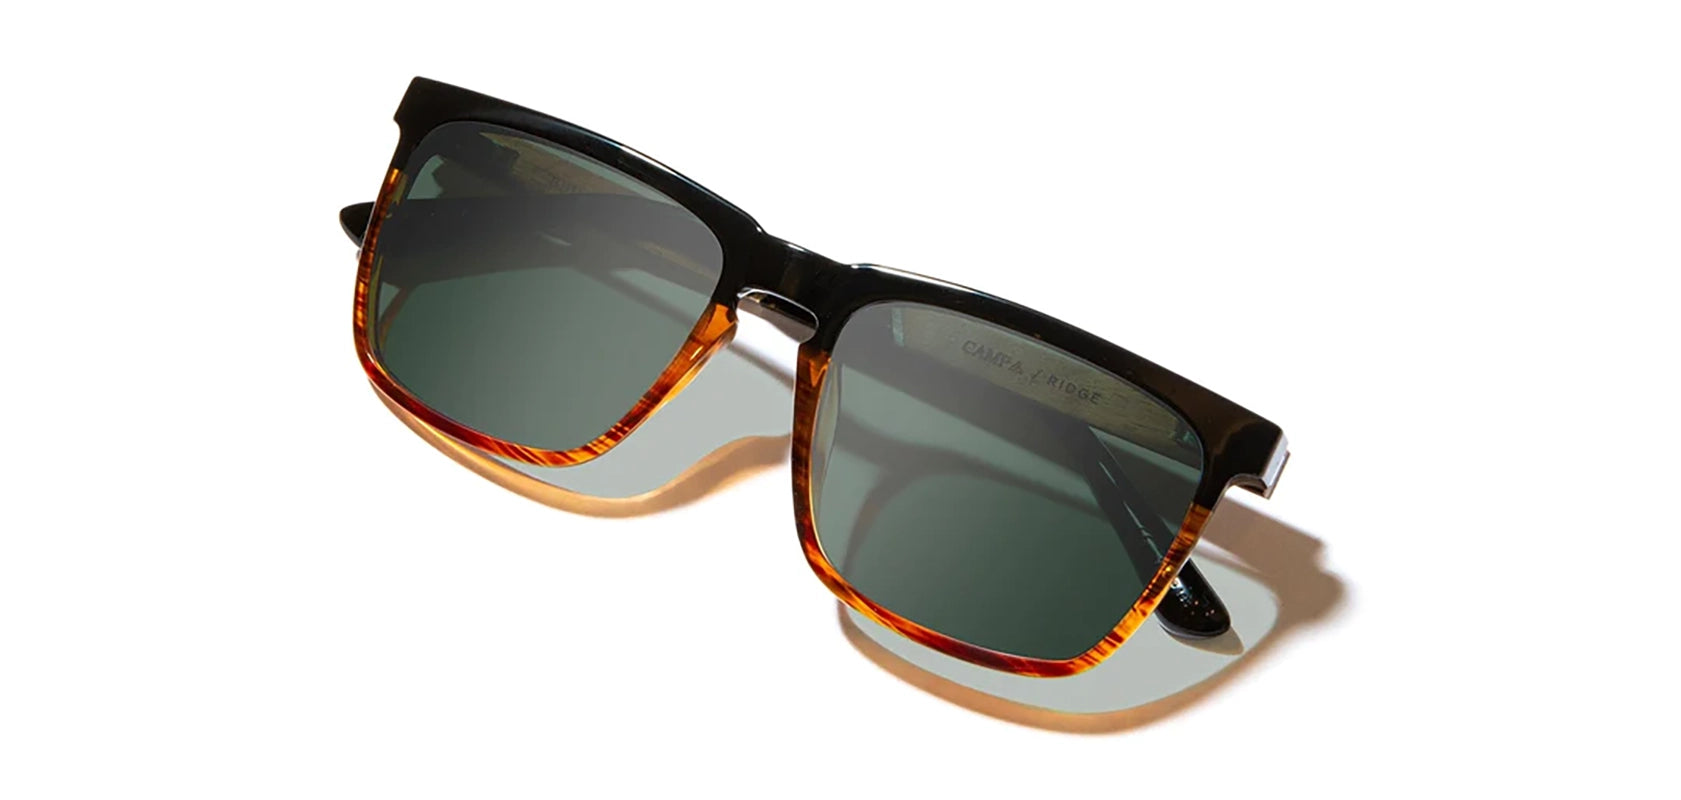 Camp Ridge Sunglasses in Black/Tortoise/Walnut frames, with Basic G15 polarized lenses, Front angled closed temple view